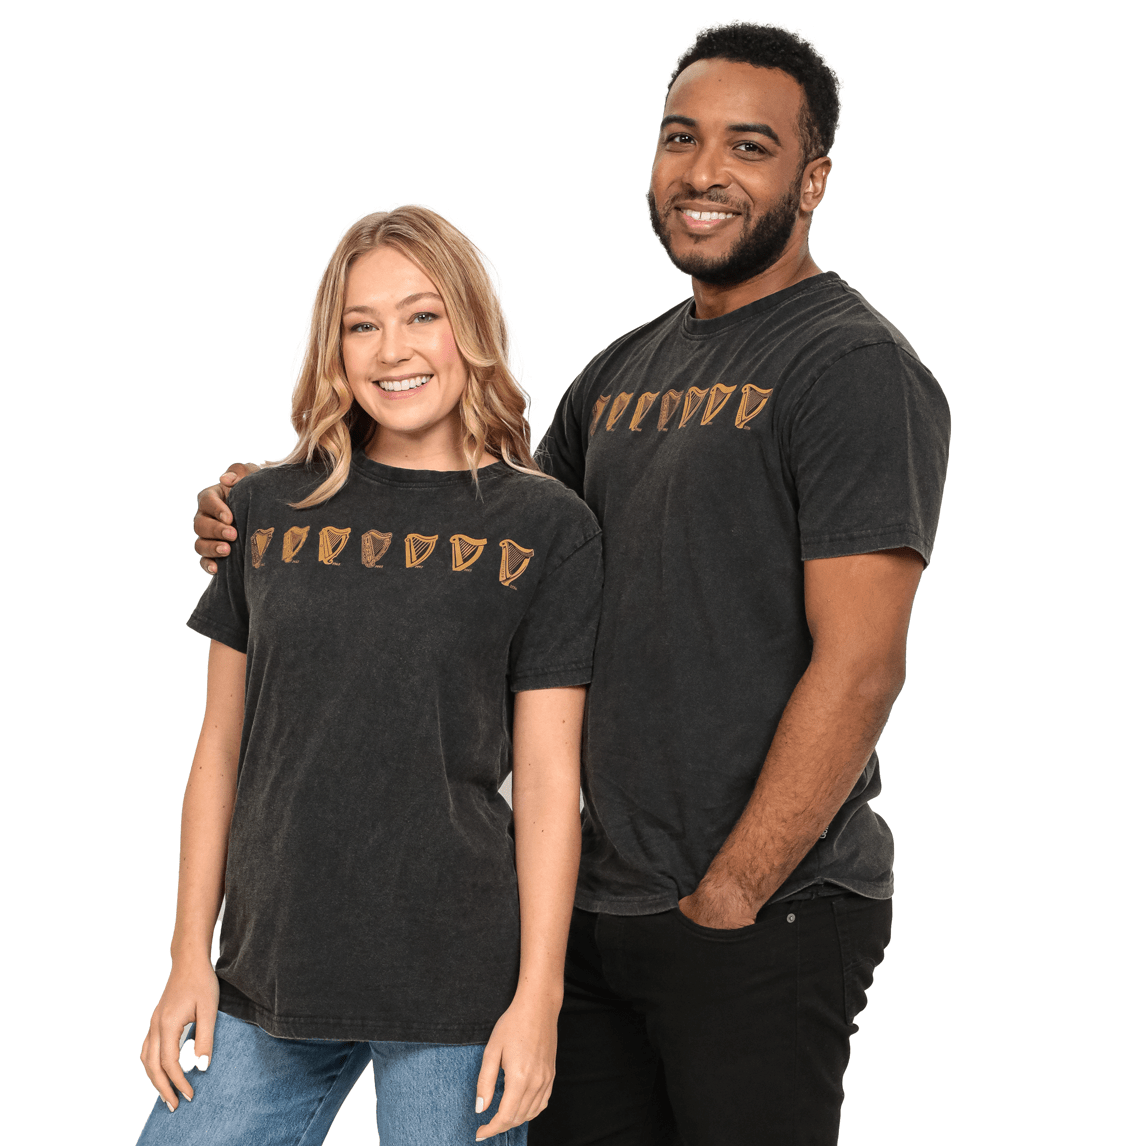 A man and woman standing next to each other wearing black Guinness UK® Evolution Harp Tee t-shirts made of cotton.